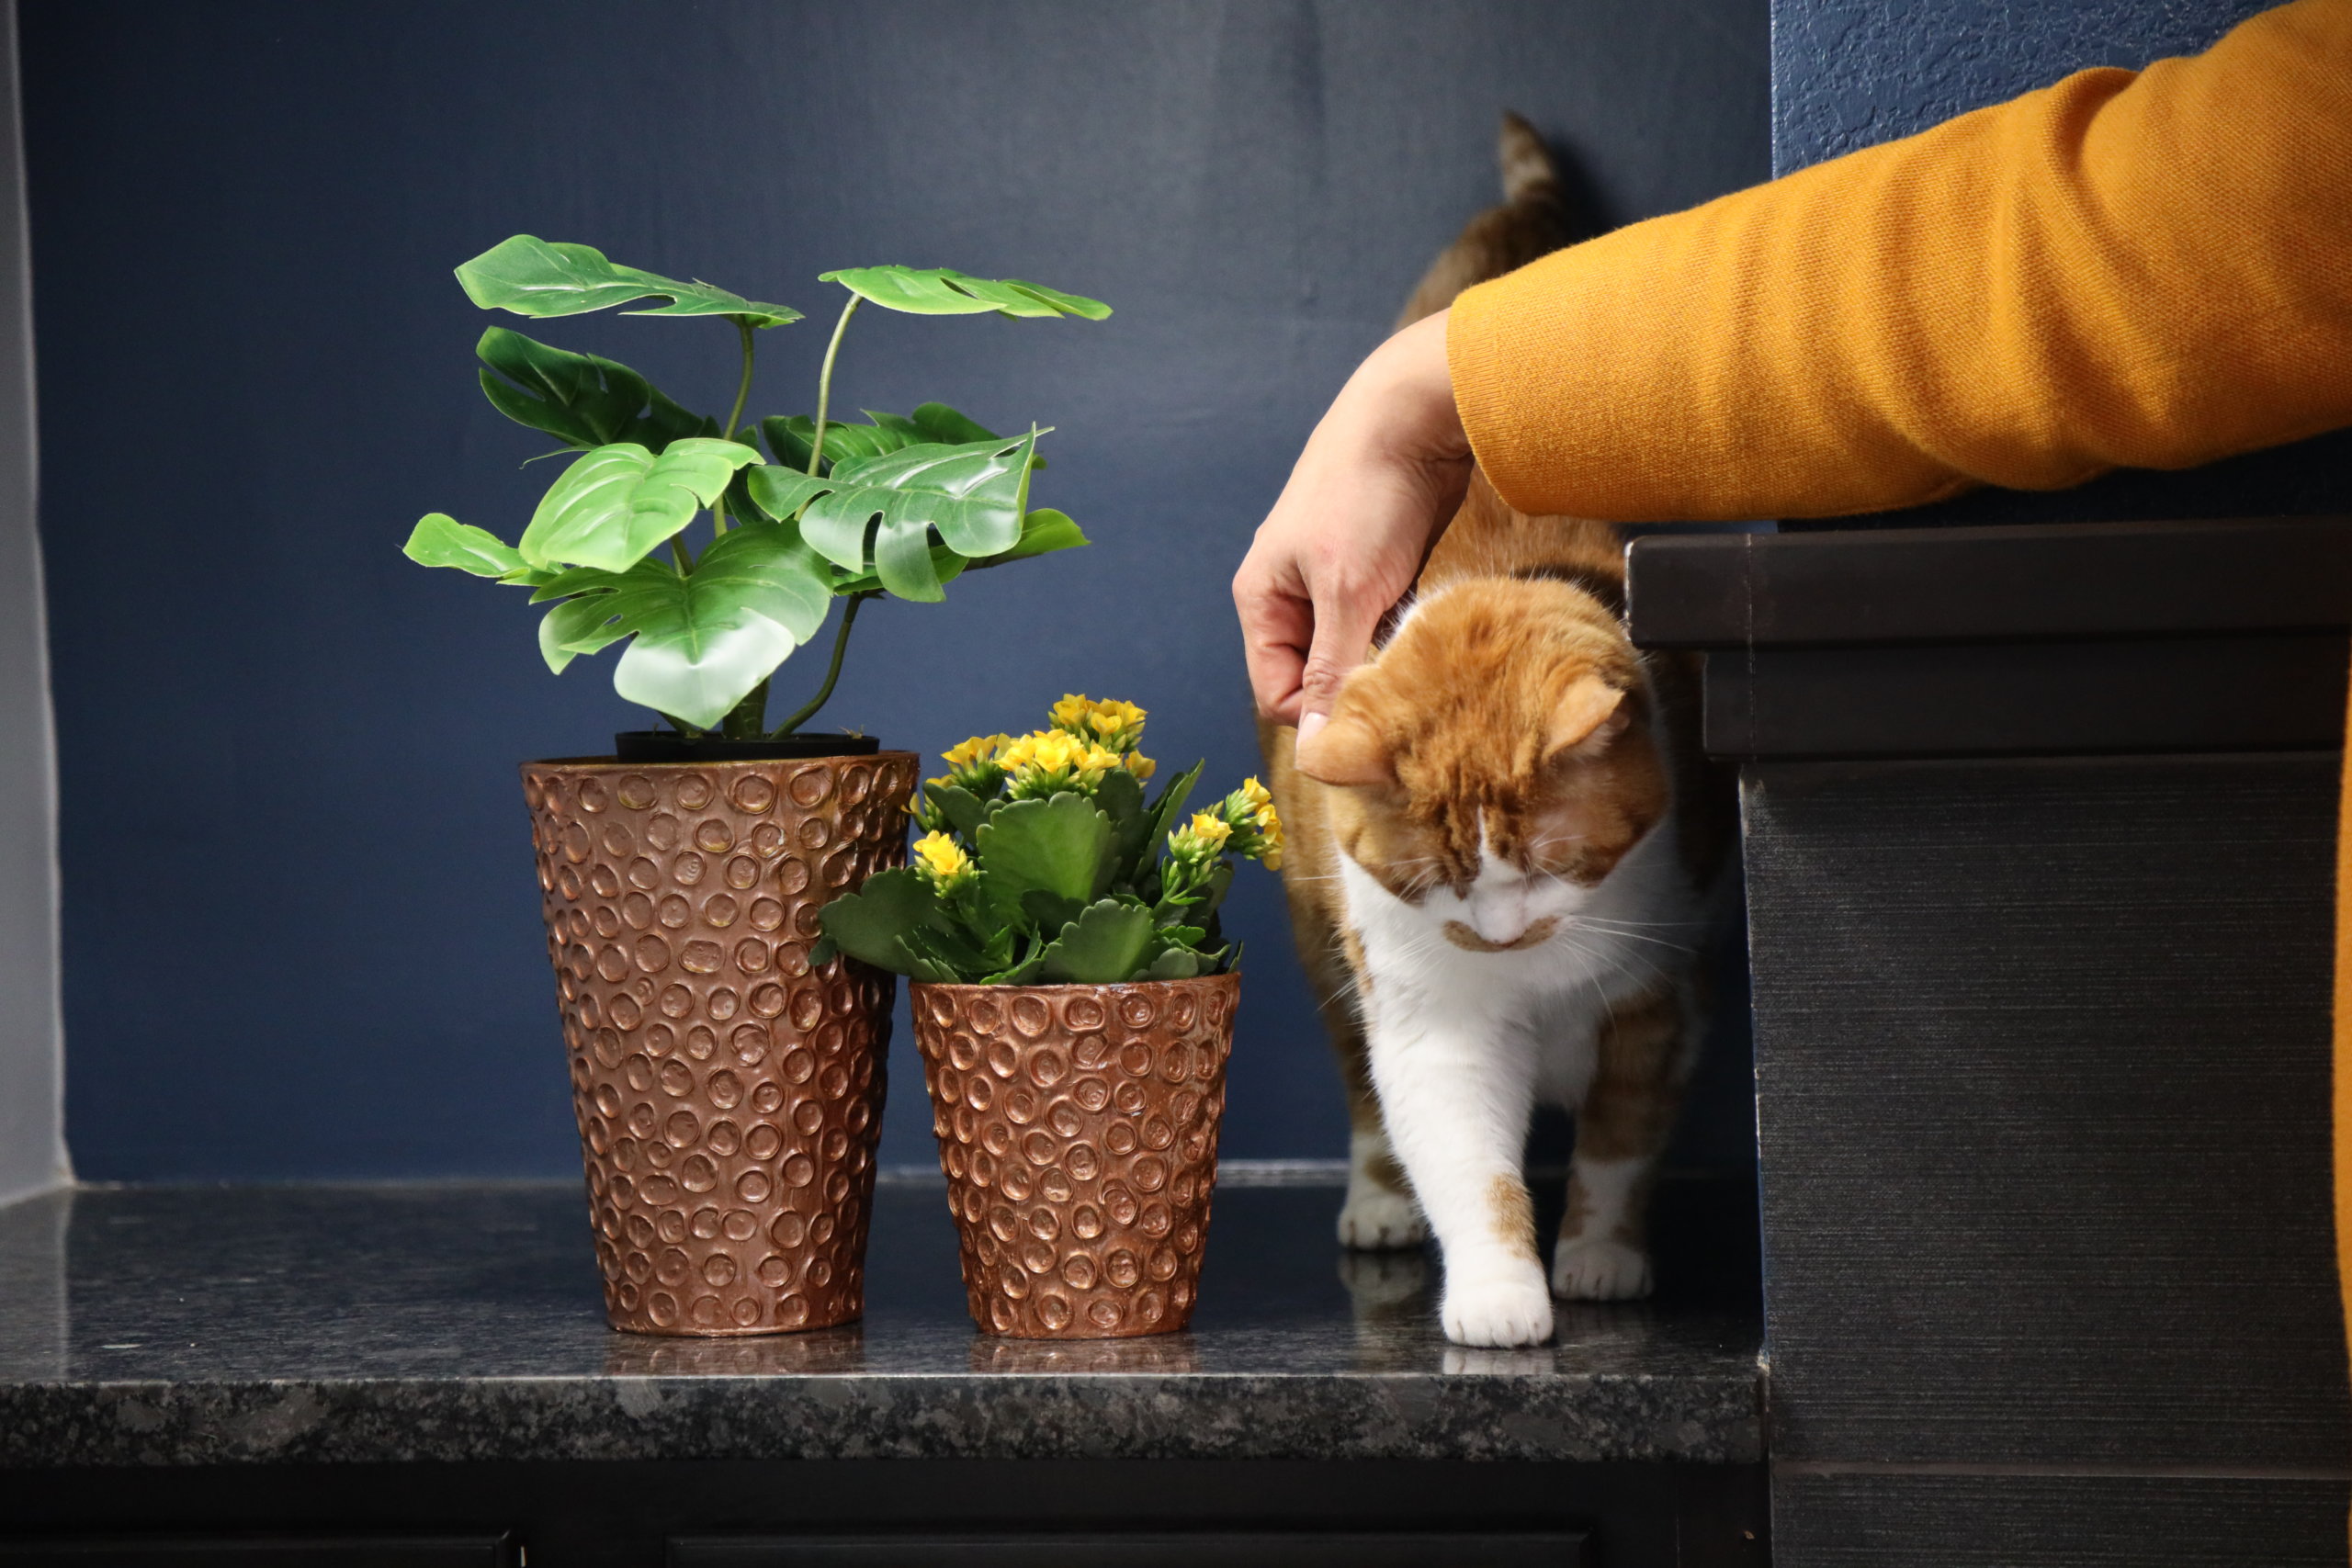 russell getting pets while standing with his copper planters